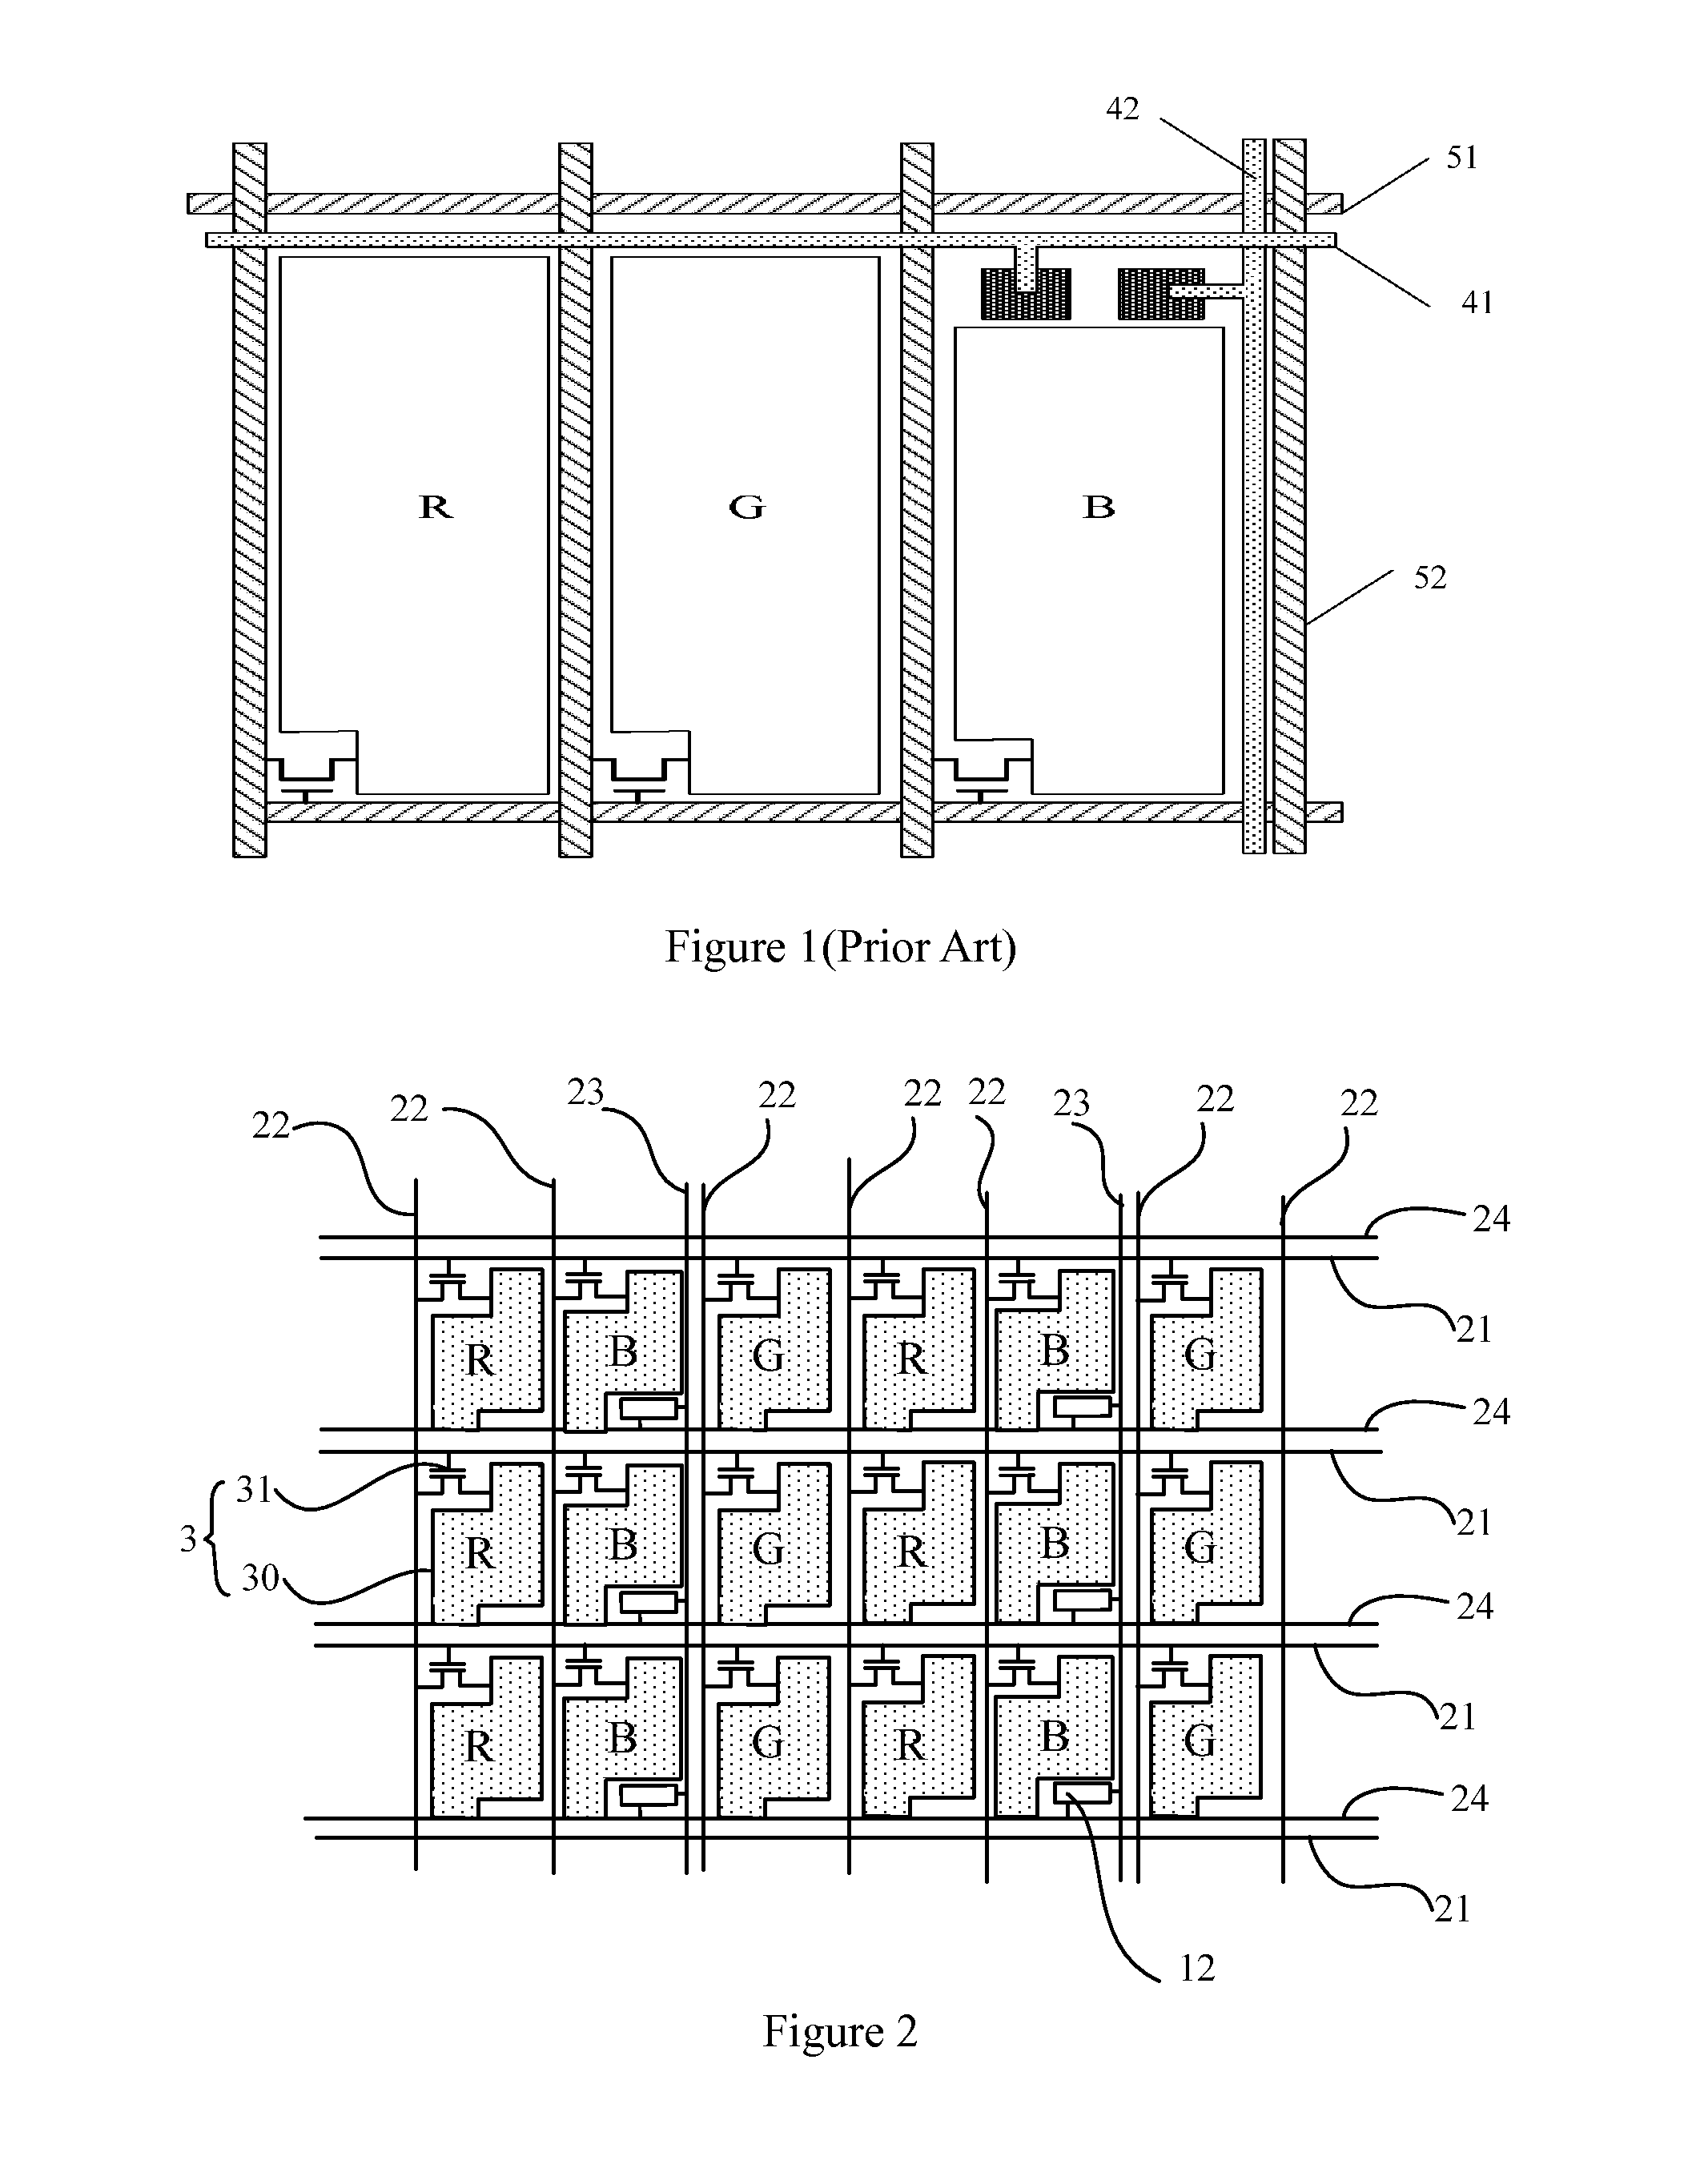 Liquid Crystal Display Touch Screen Array Substrate and the Corresponding Liquid Crystal Display Touch Screen